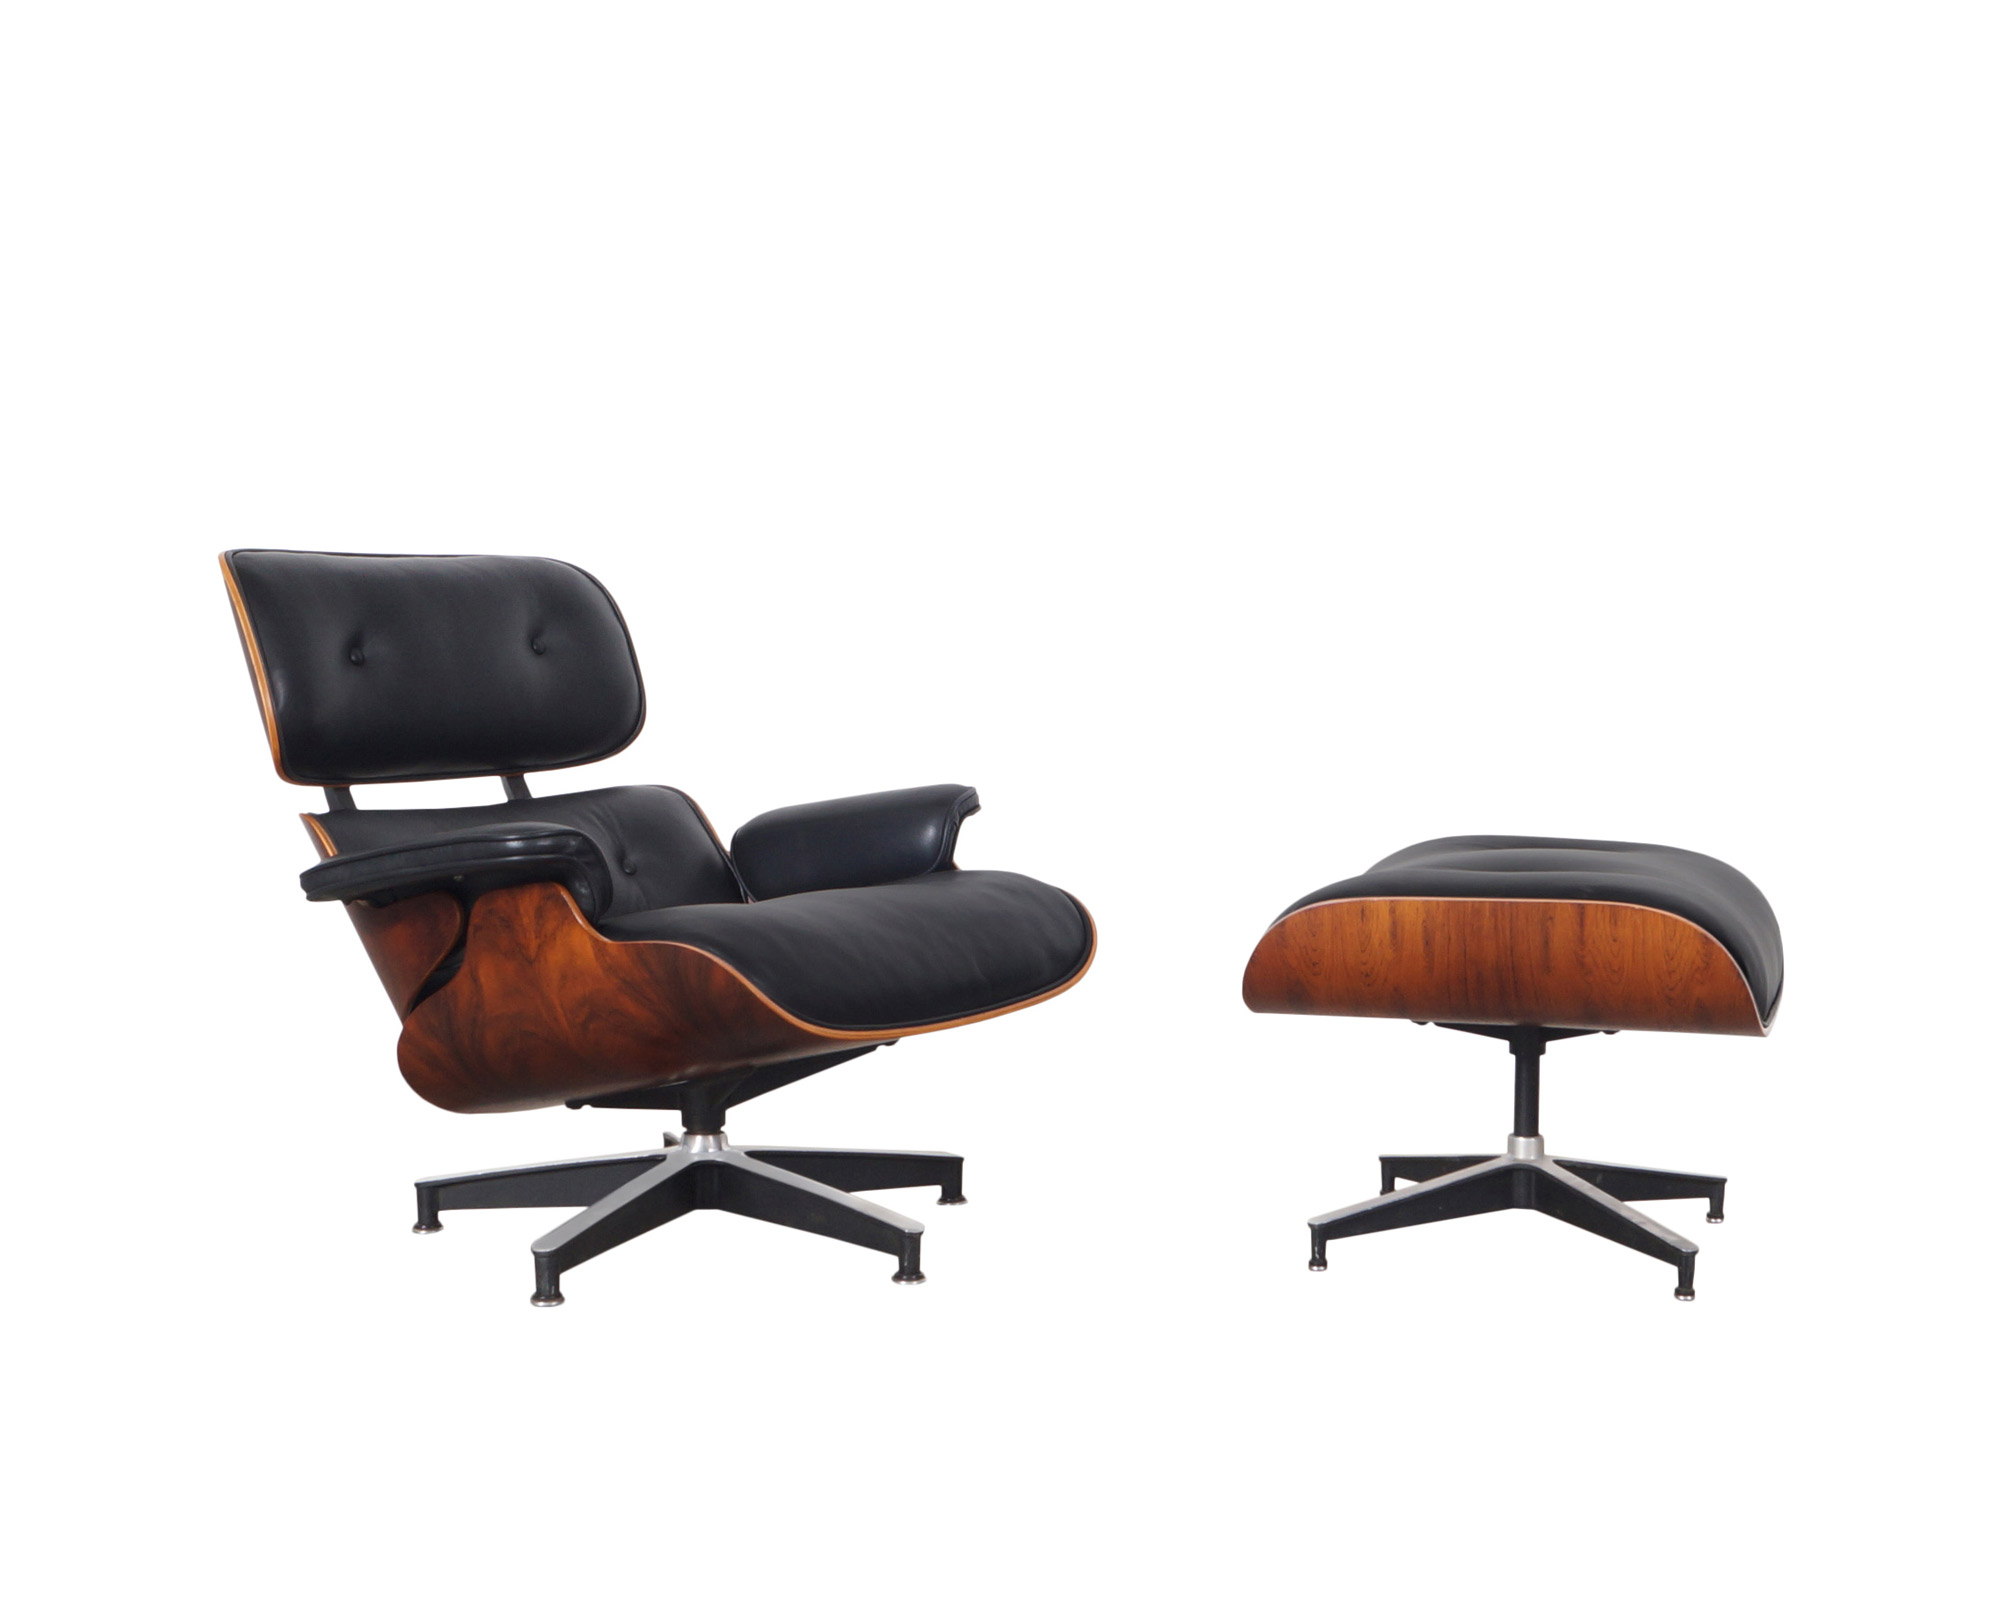 Charles Eames Rosewood Lounge Chair and Ottoman by Herman Miller